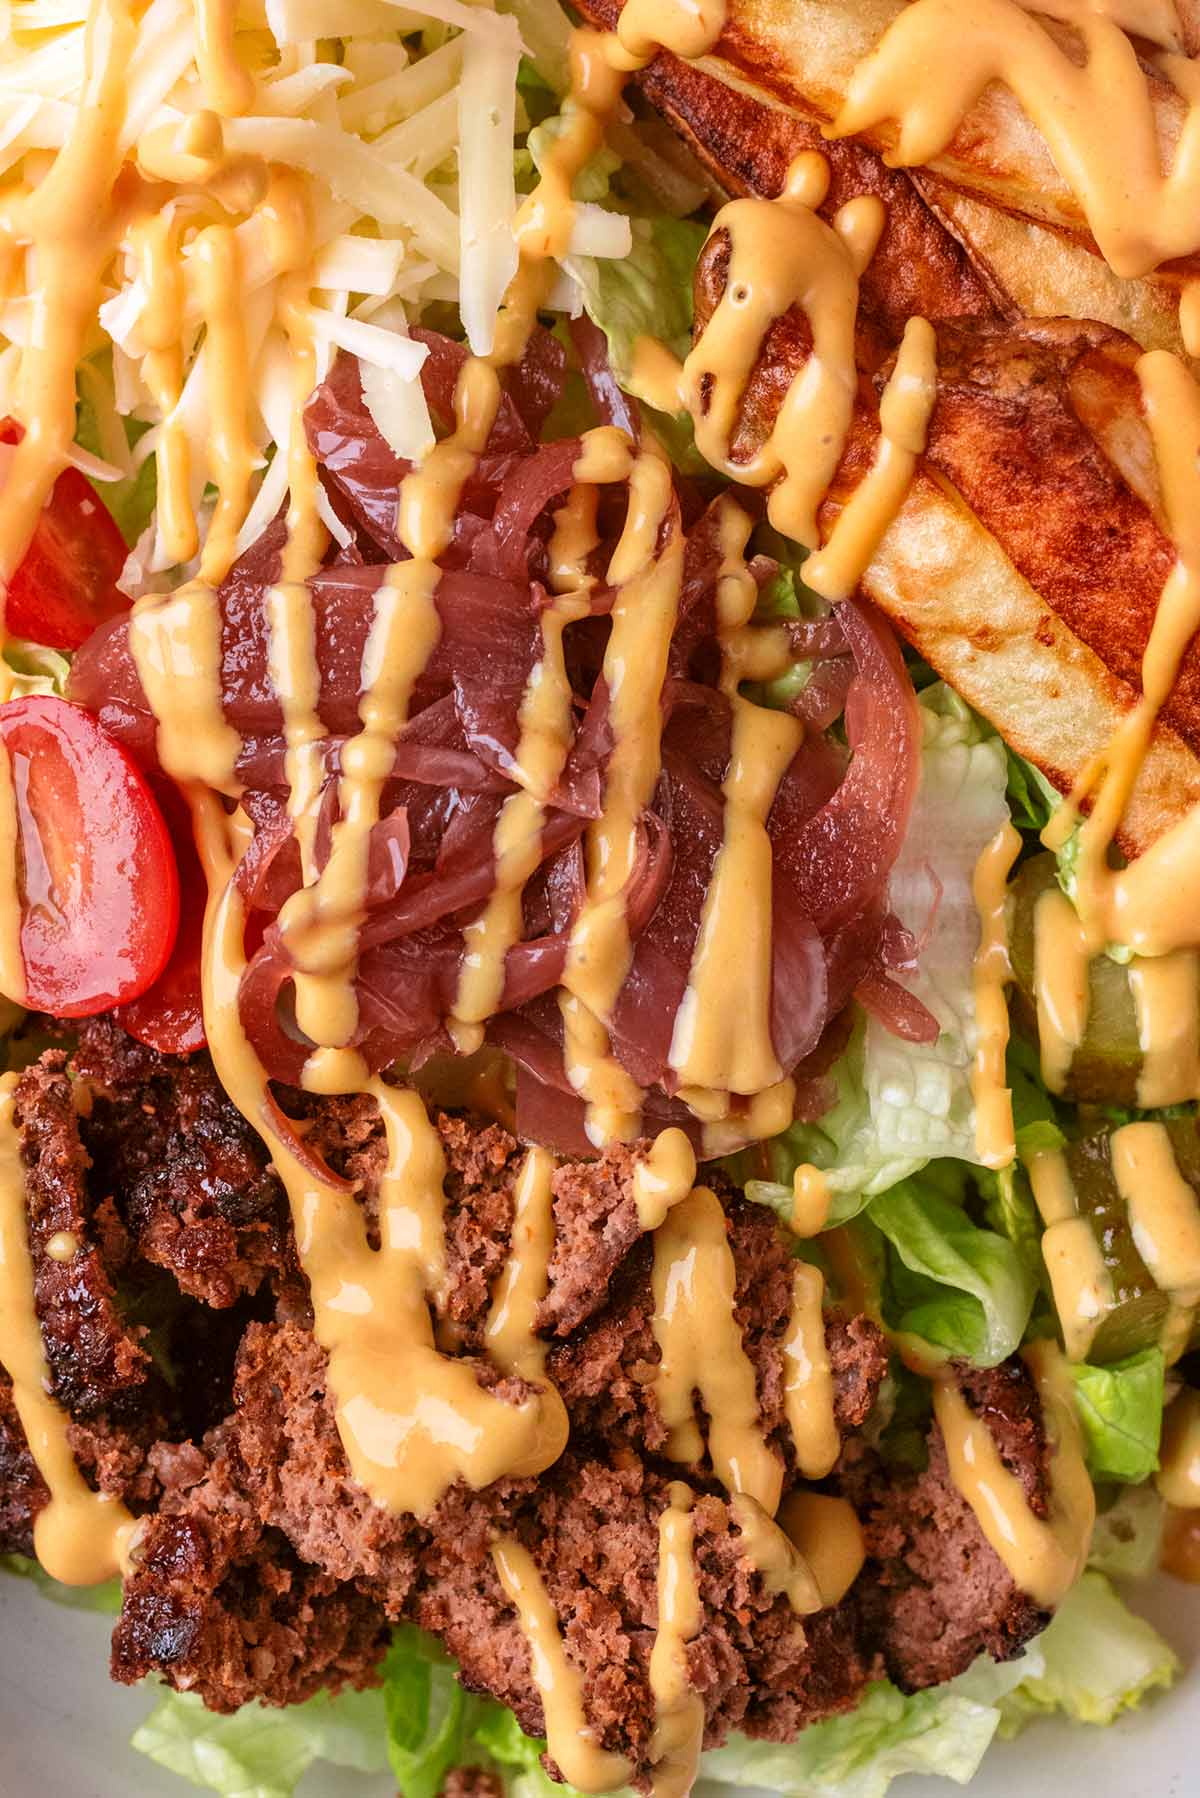 Burger sauce drizzled over chopped up burger and salad.